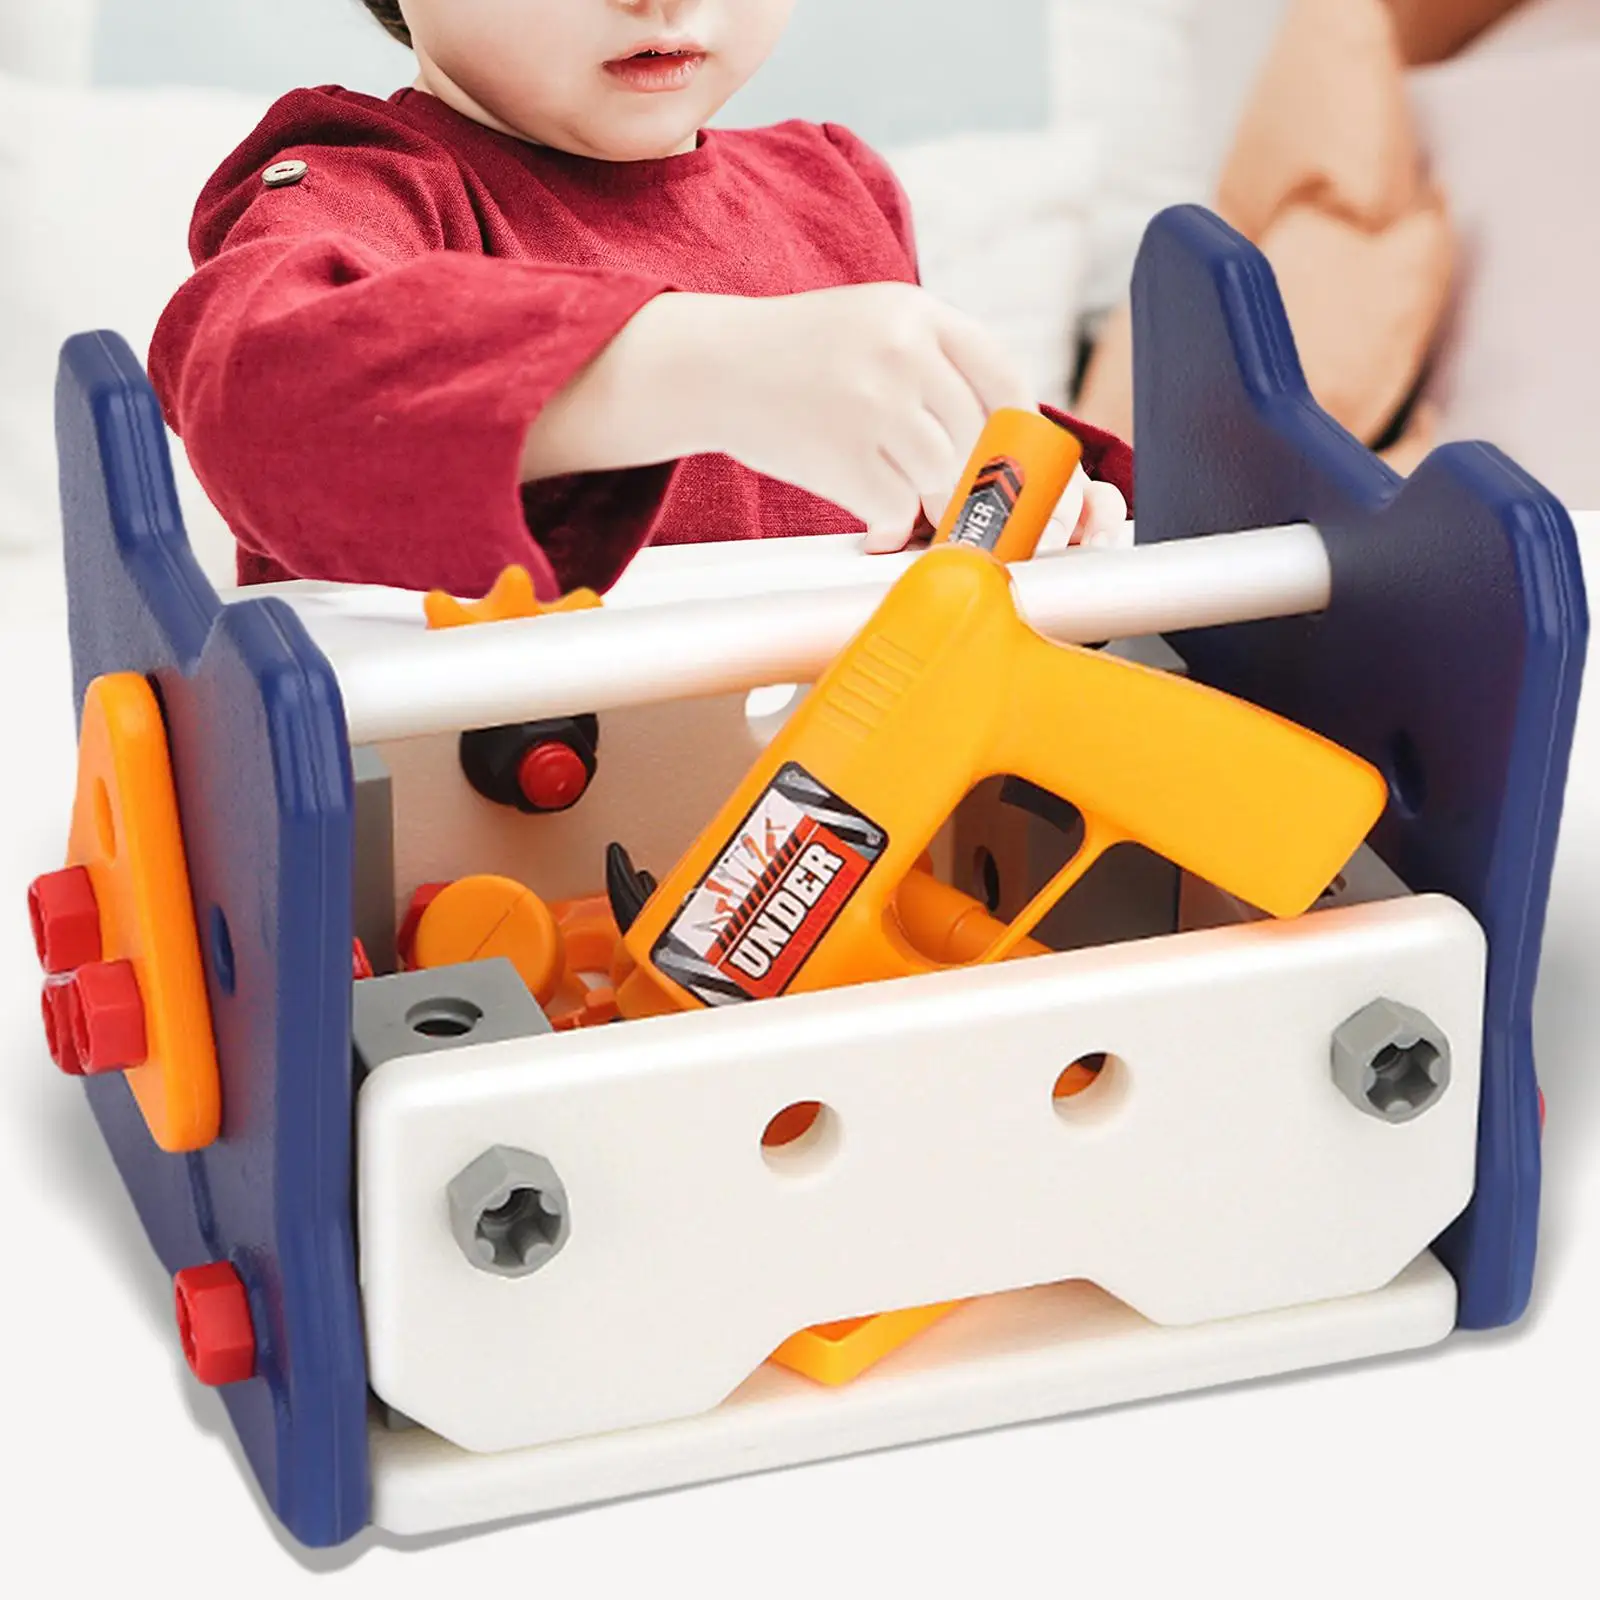 Tool Box Toy Pretend Play Develops Fine Motor Skills Gift for